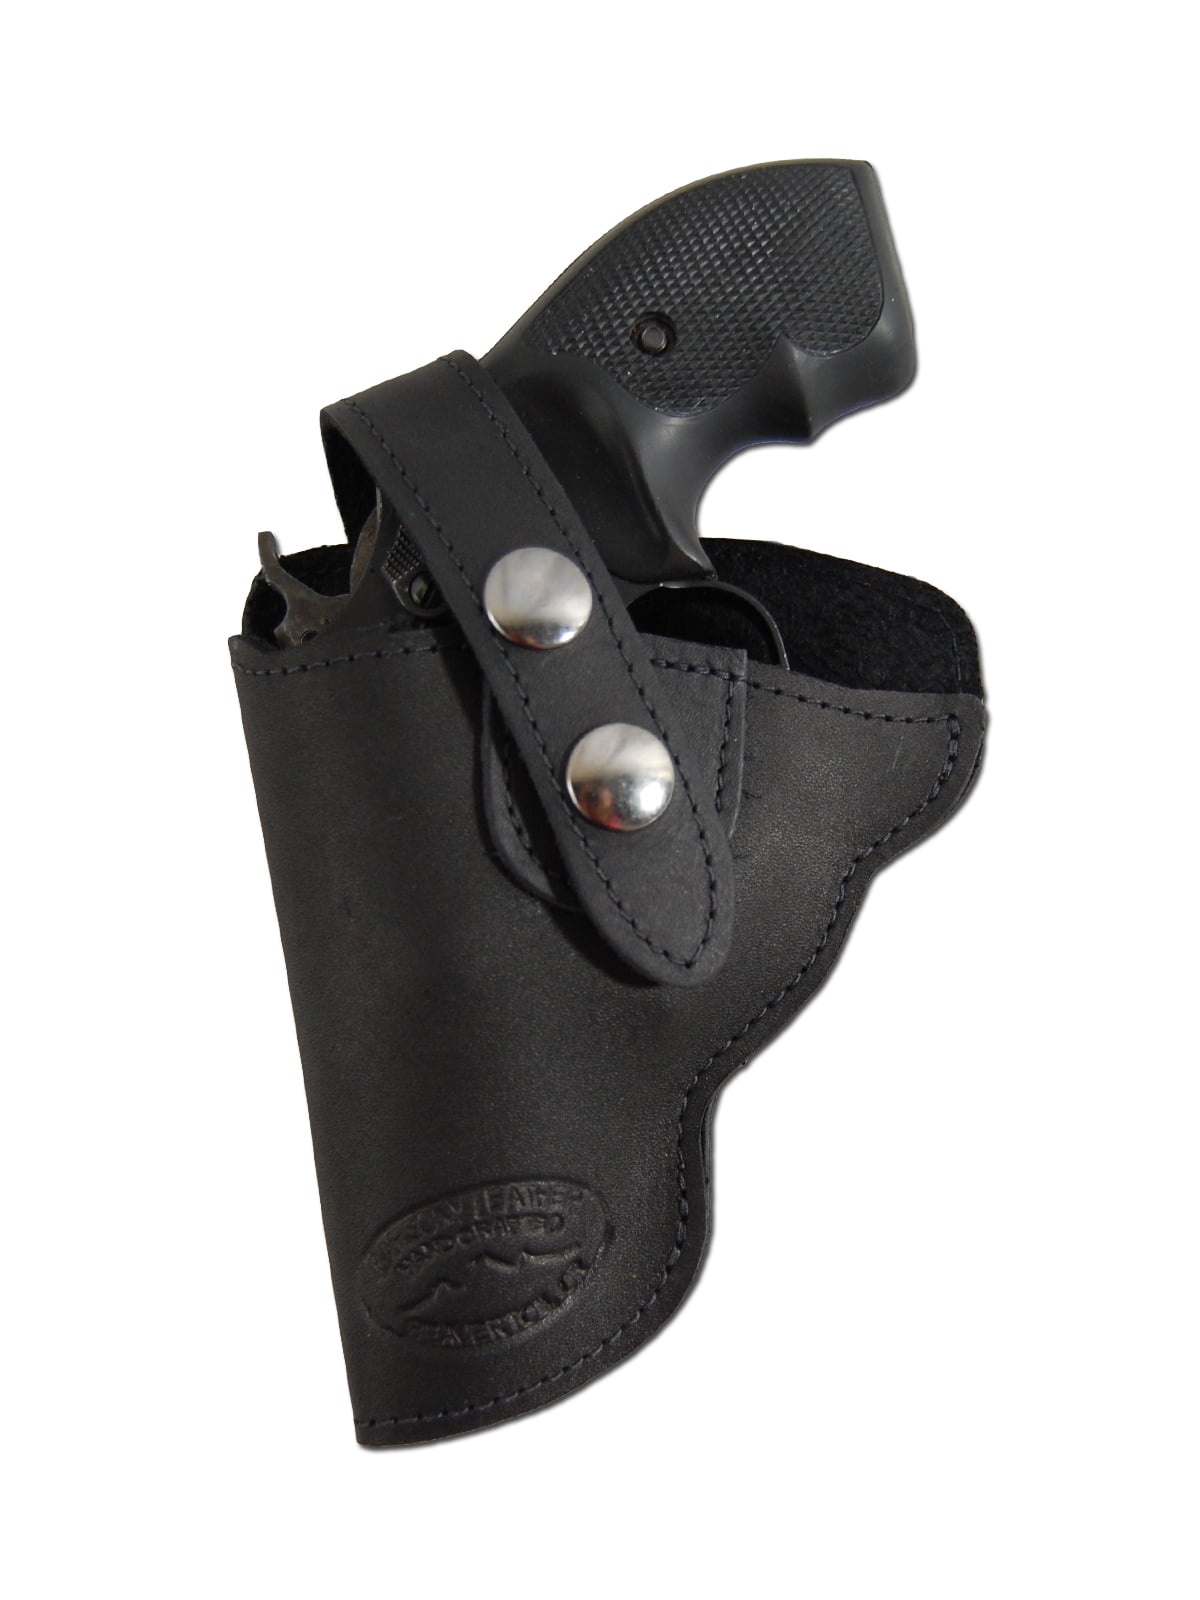 Ruger Left Hand Holster fits 4-inch Smith & Wesson Colt 